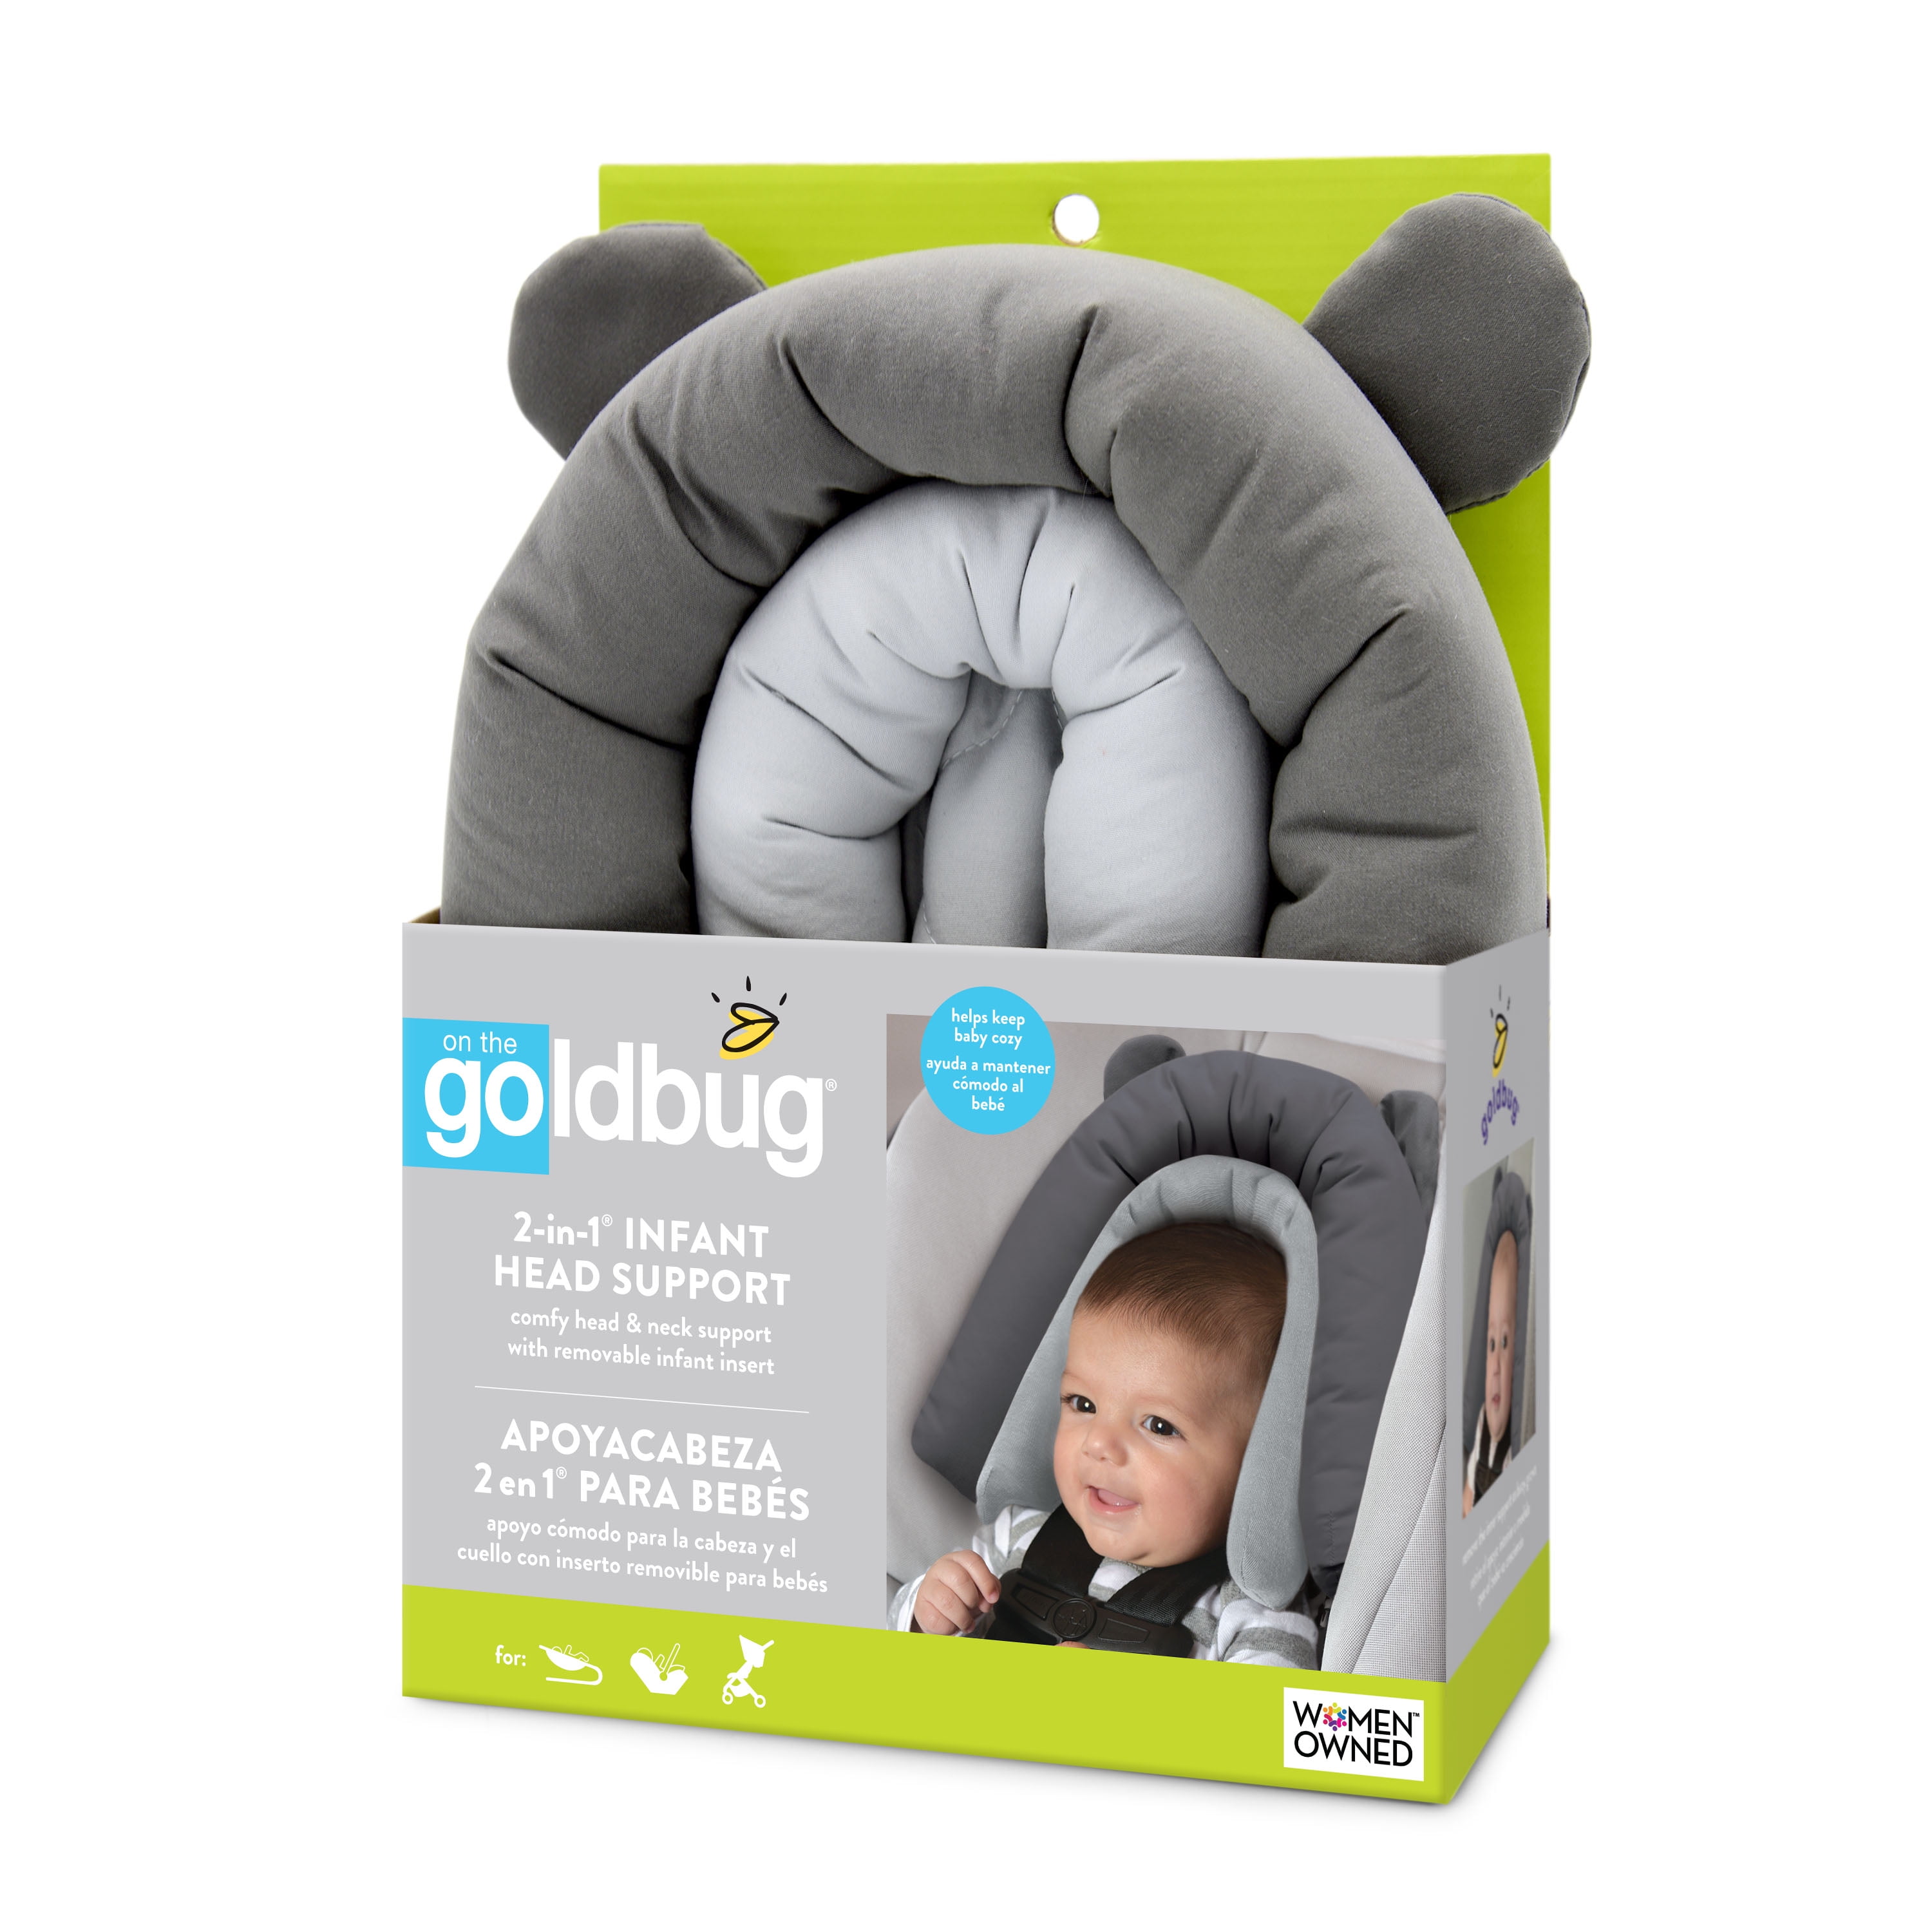 the Goldbug 2-in-1 Infant Head Support 